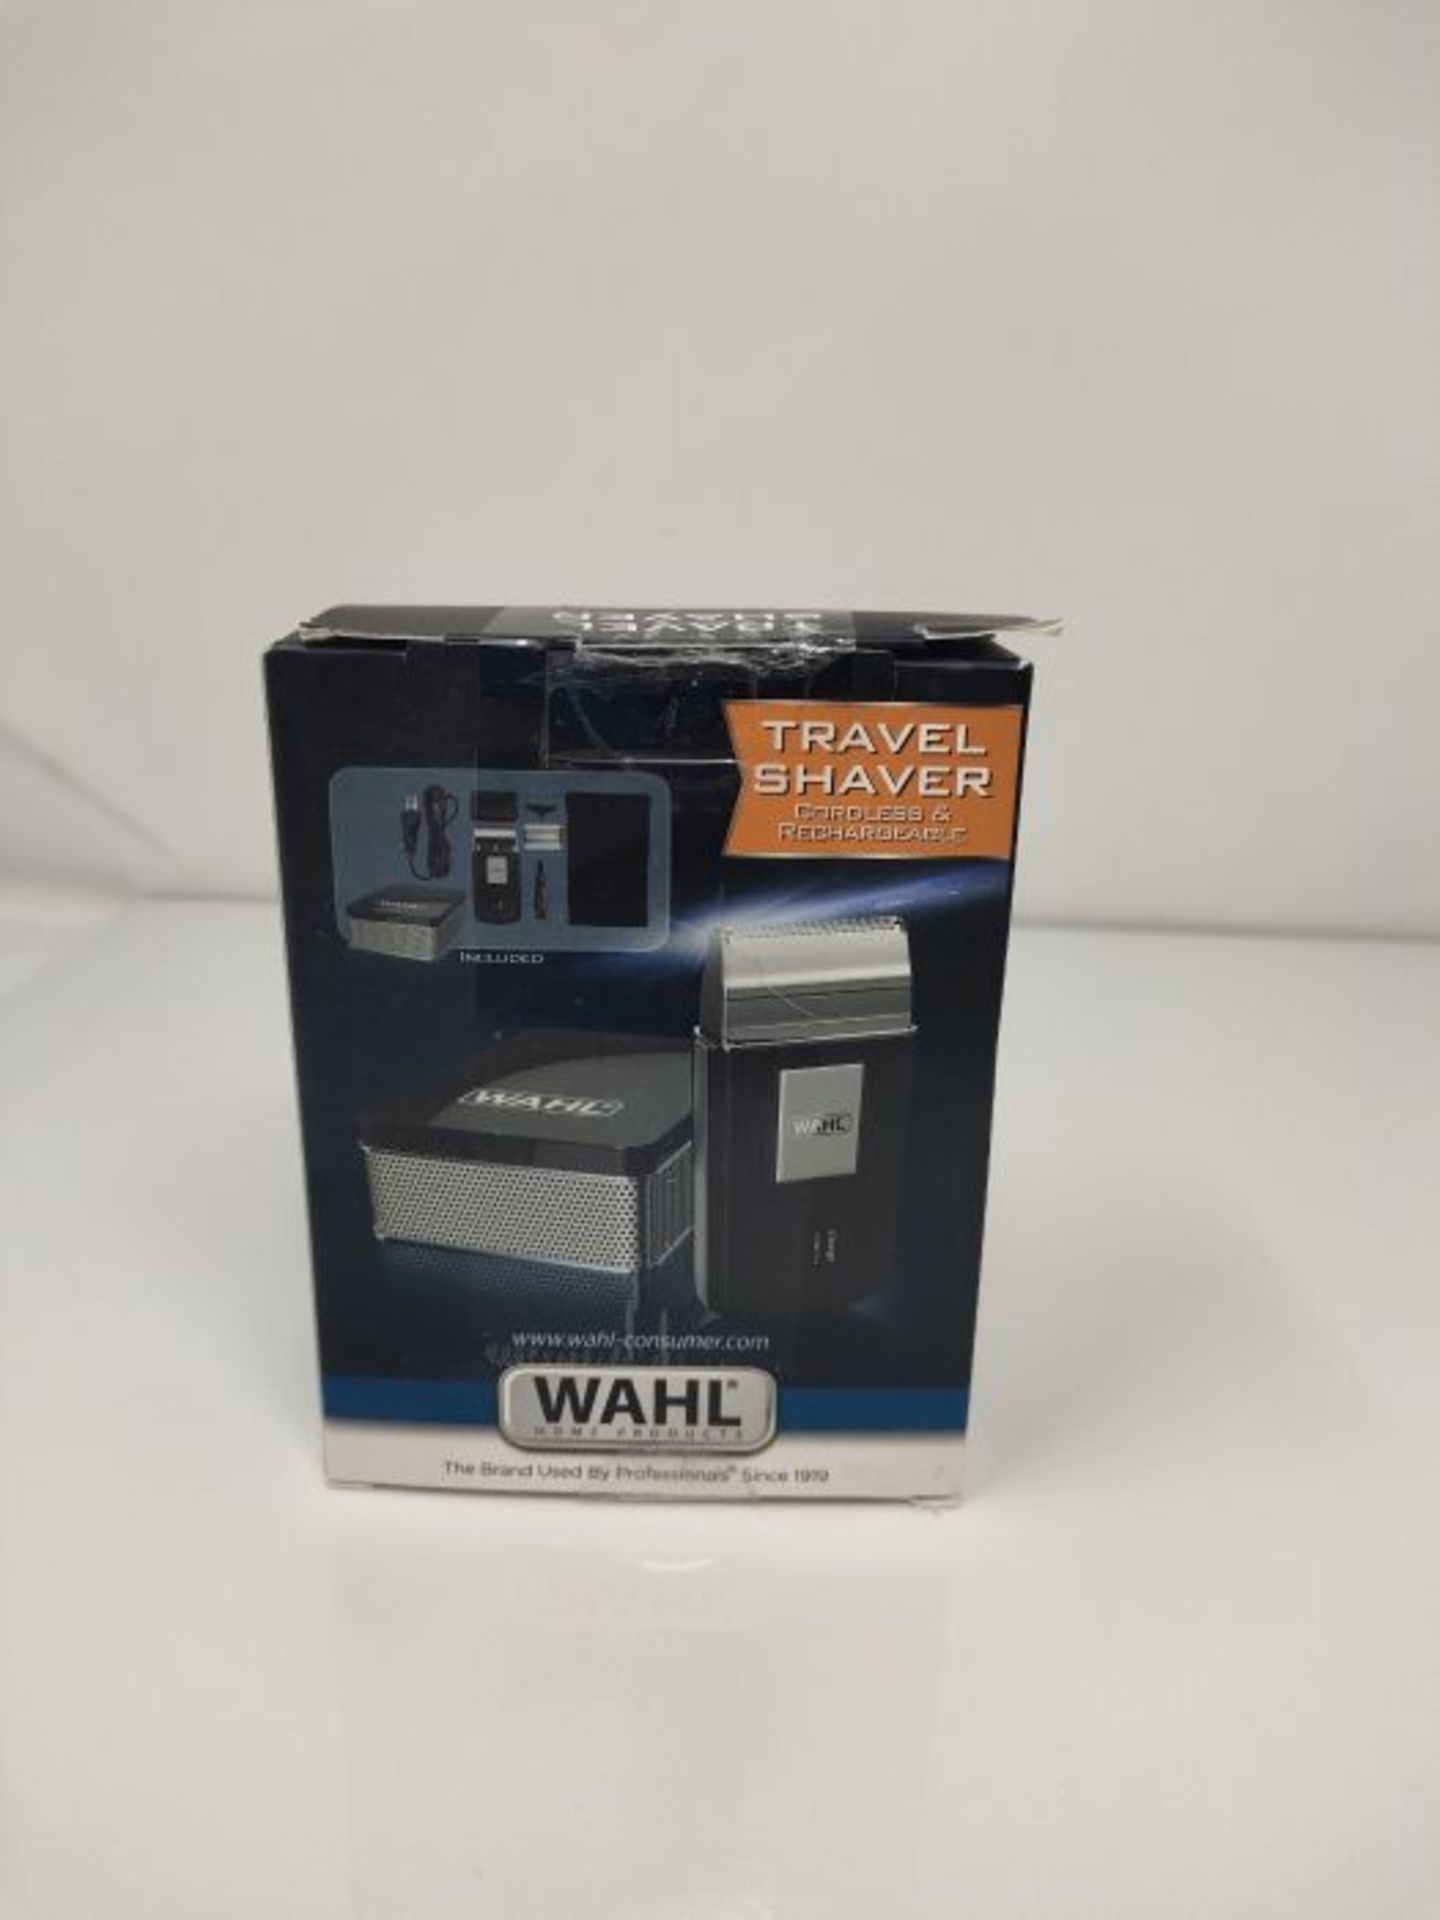 RRP £52.00 WAHL Travel Shaver (3615-1016), Black, Silver - Image 2 of 3